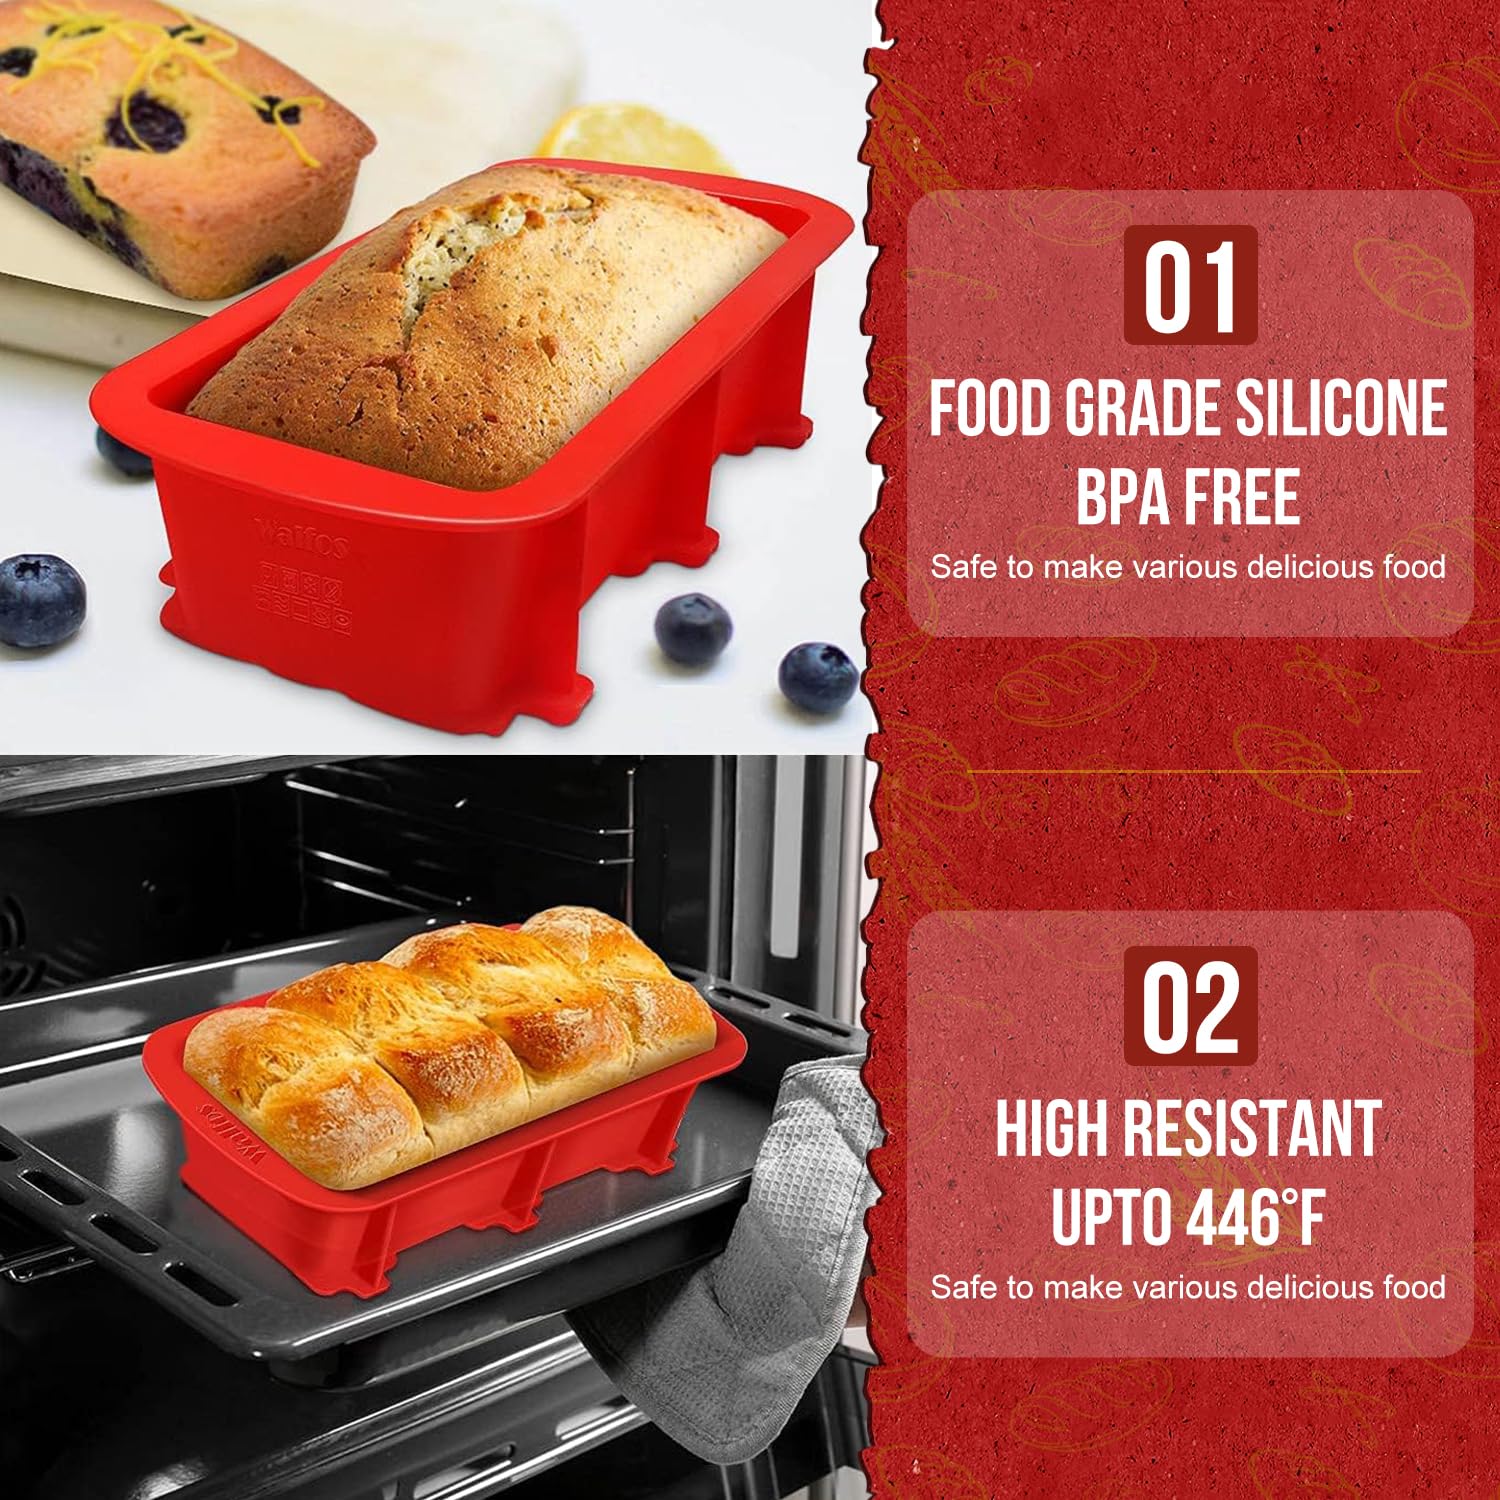 Walfos Silicone Bread Loaf Pan，9 x 5 inch Non-Stick Silicone Loaf Pans For Baking Set of 2，Perfect For Bread, Cake, Meatloaf, BPA Free and Dishwasher Safe